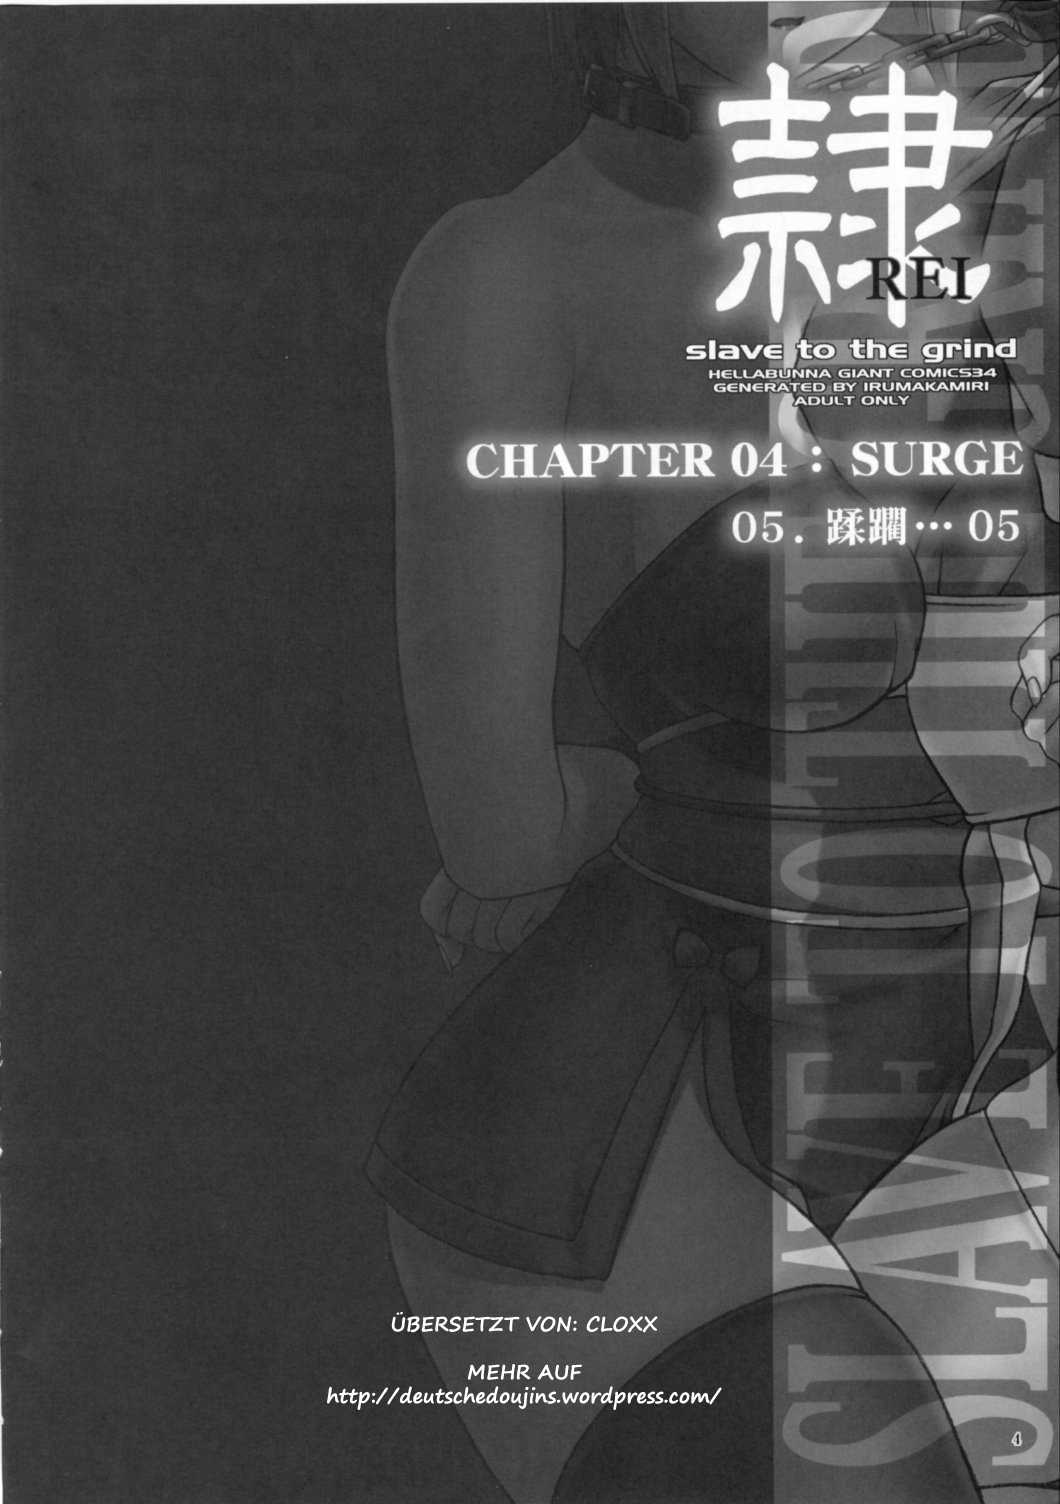 Rei Chapter 04 Surge 